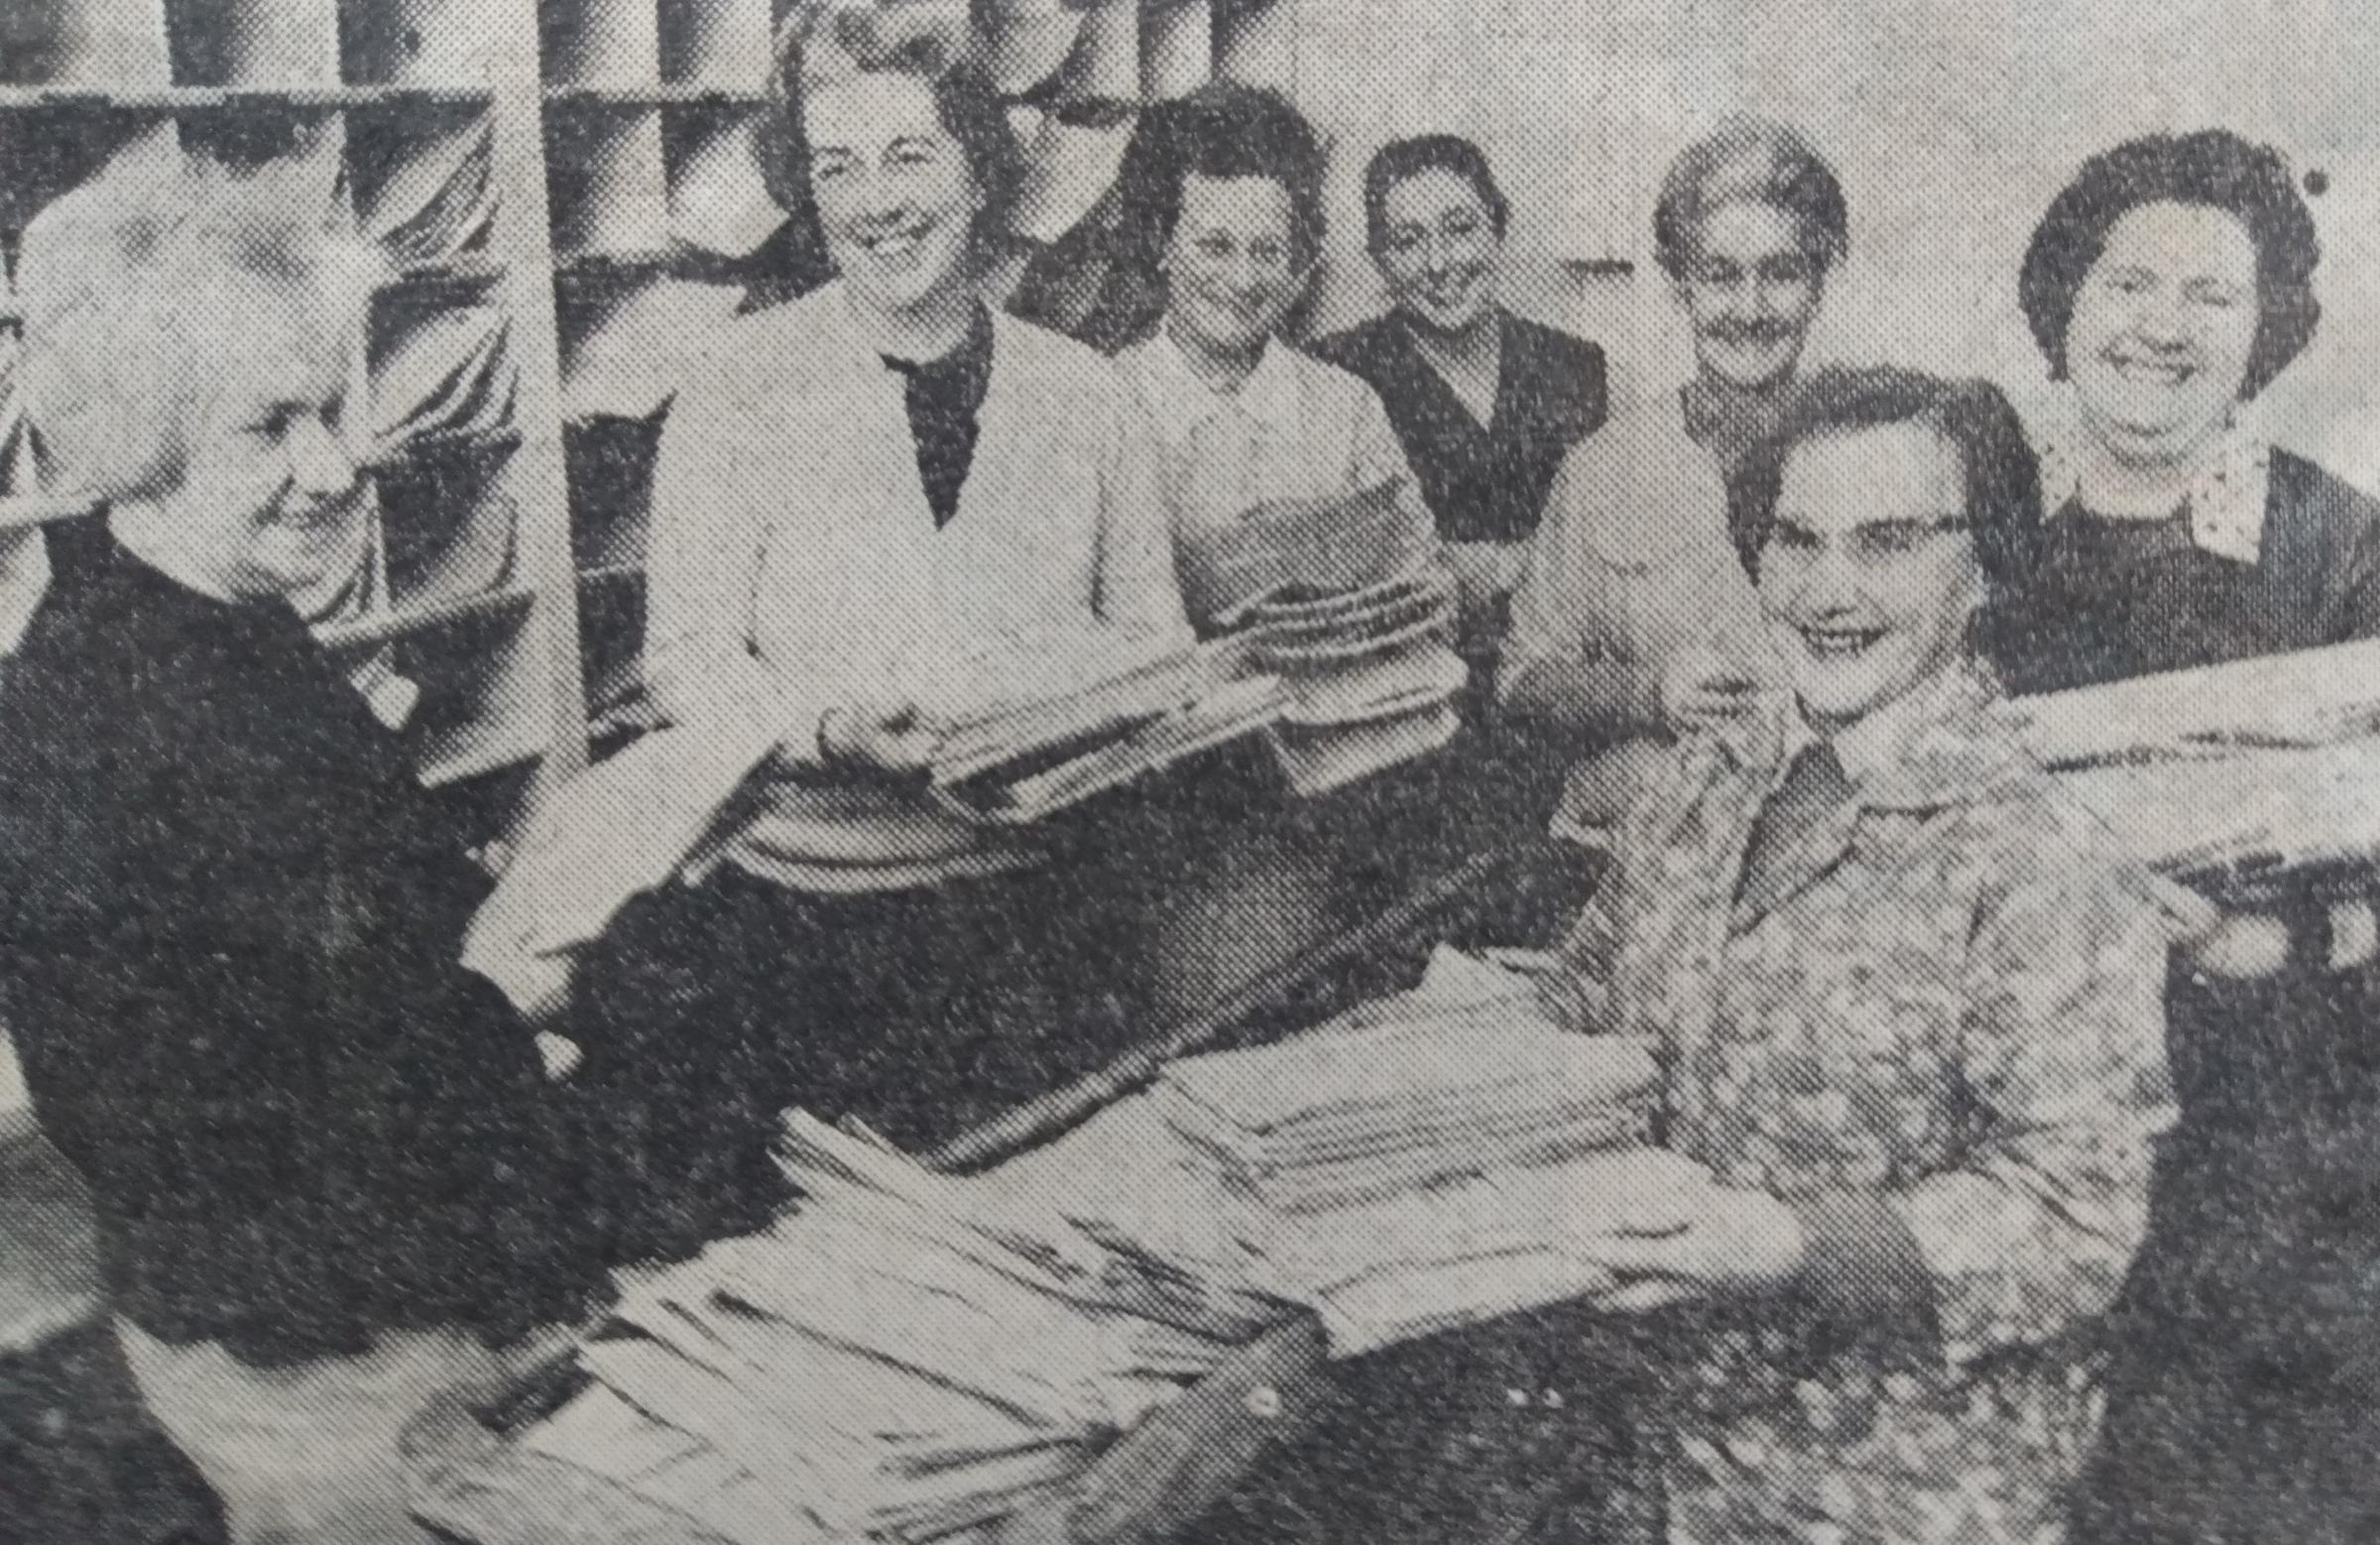 December 1973 and extra staff are drafted in to deal with the big Christmas post rush in Southfield Street